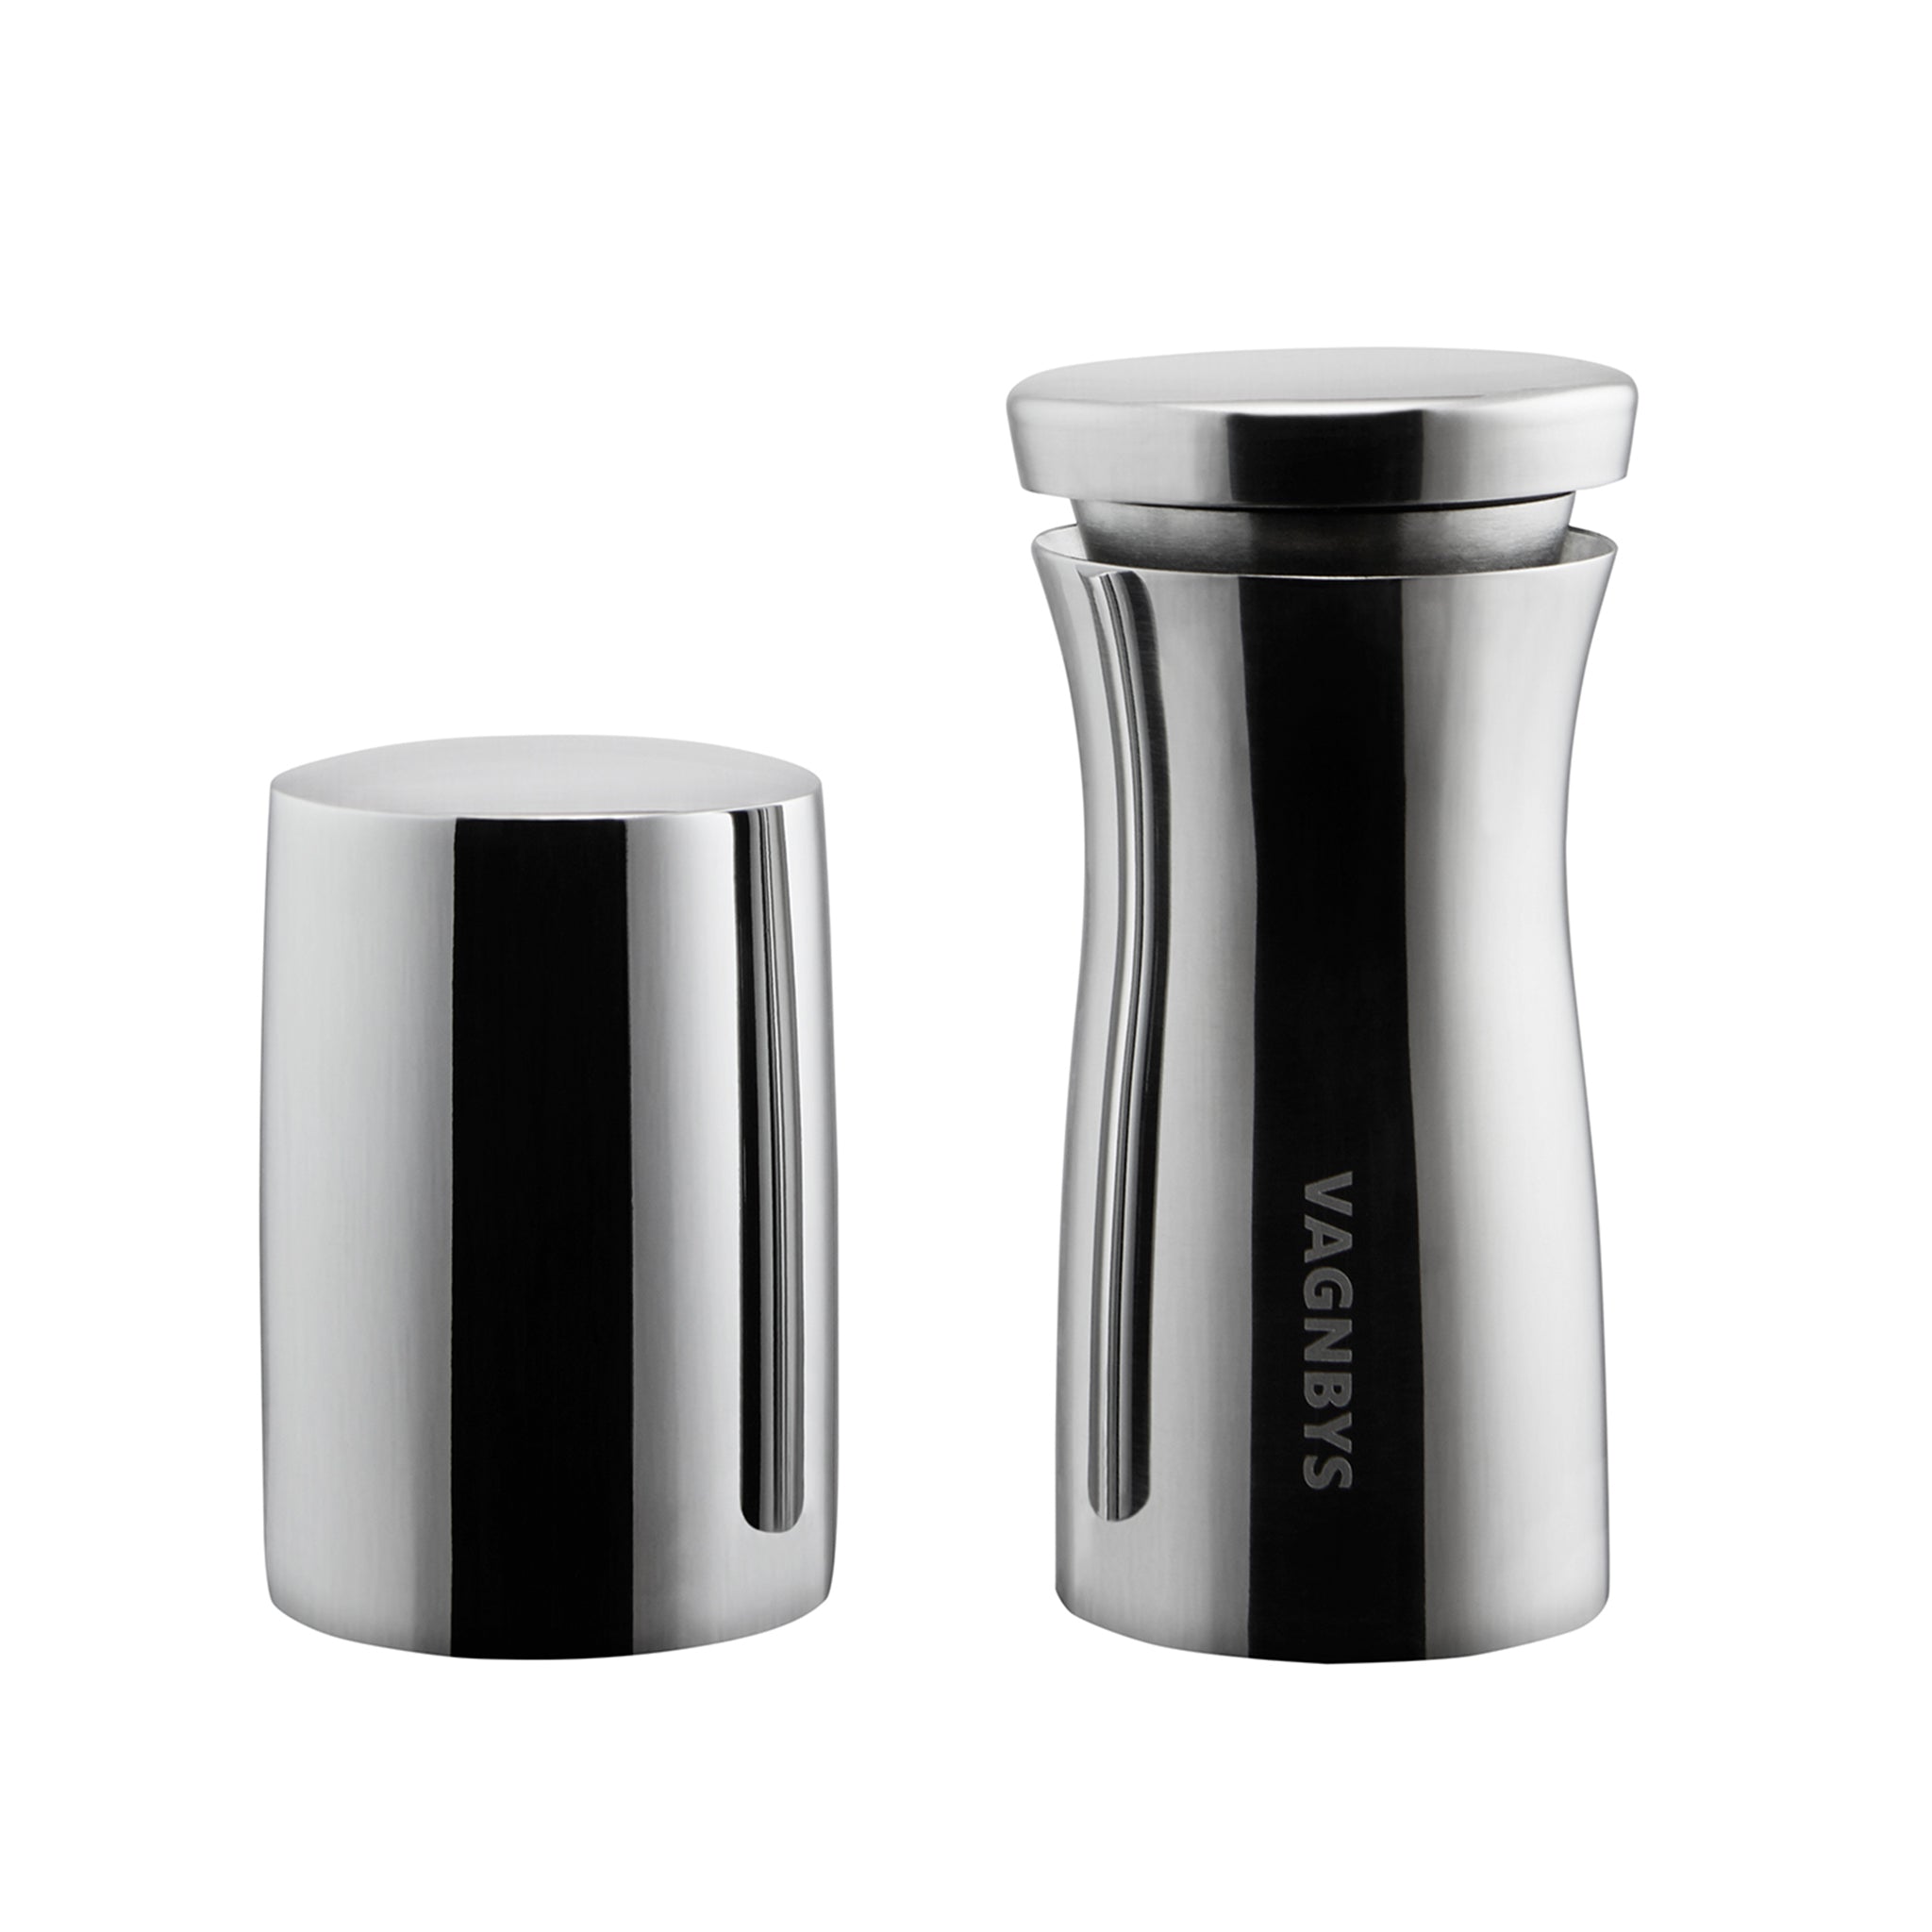 Vagnbys® Wine Decantiere + Stopper Set by Ethan+Ashe